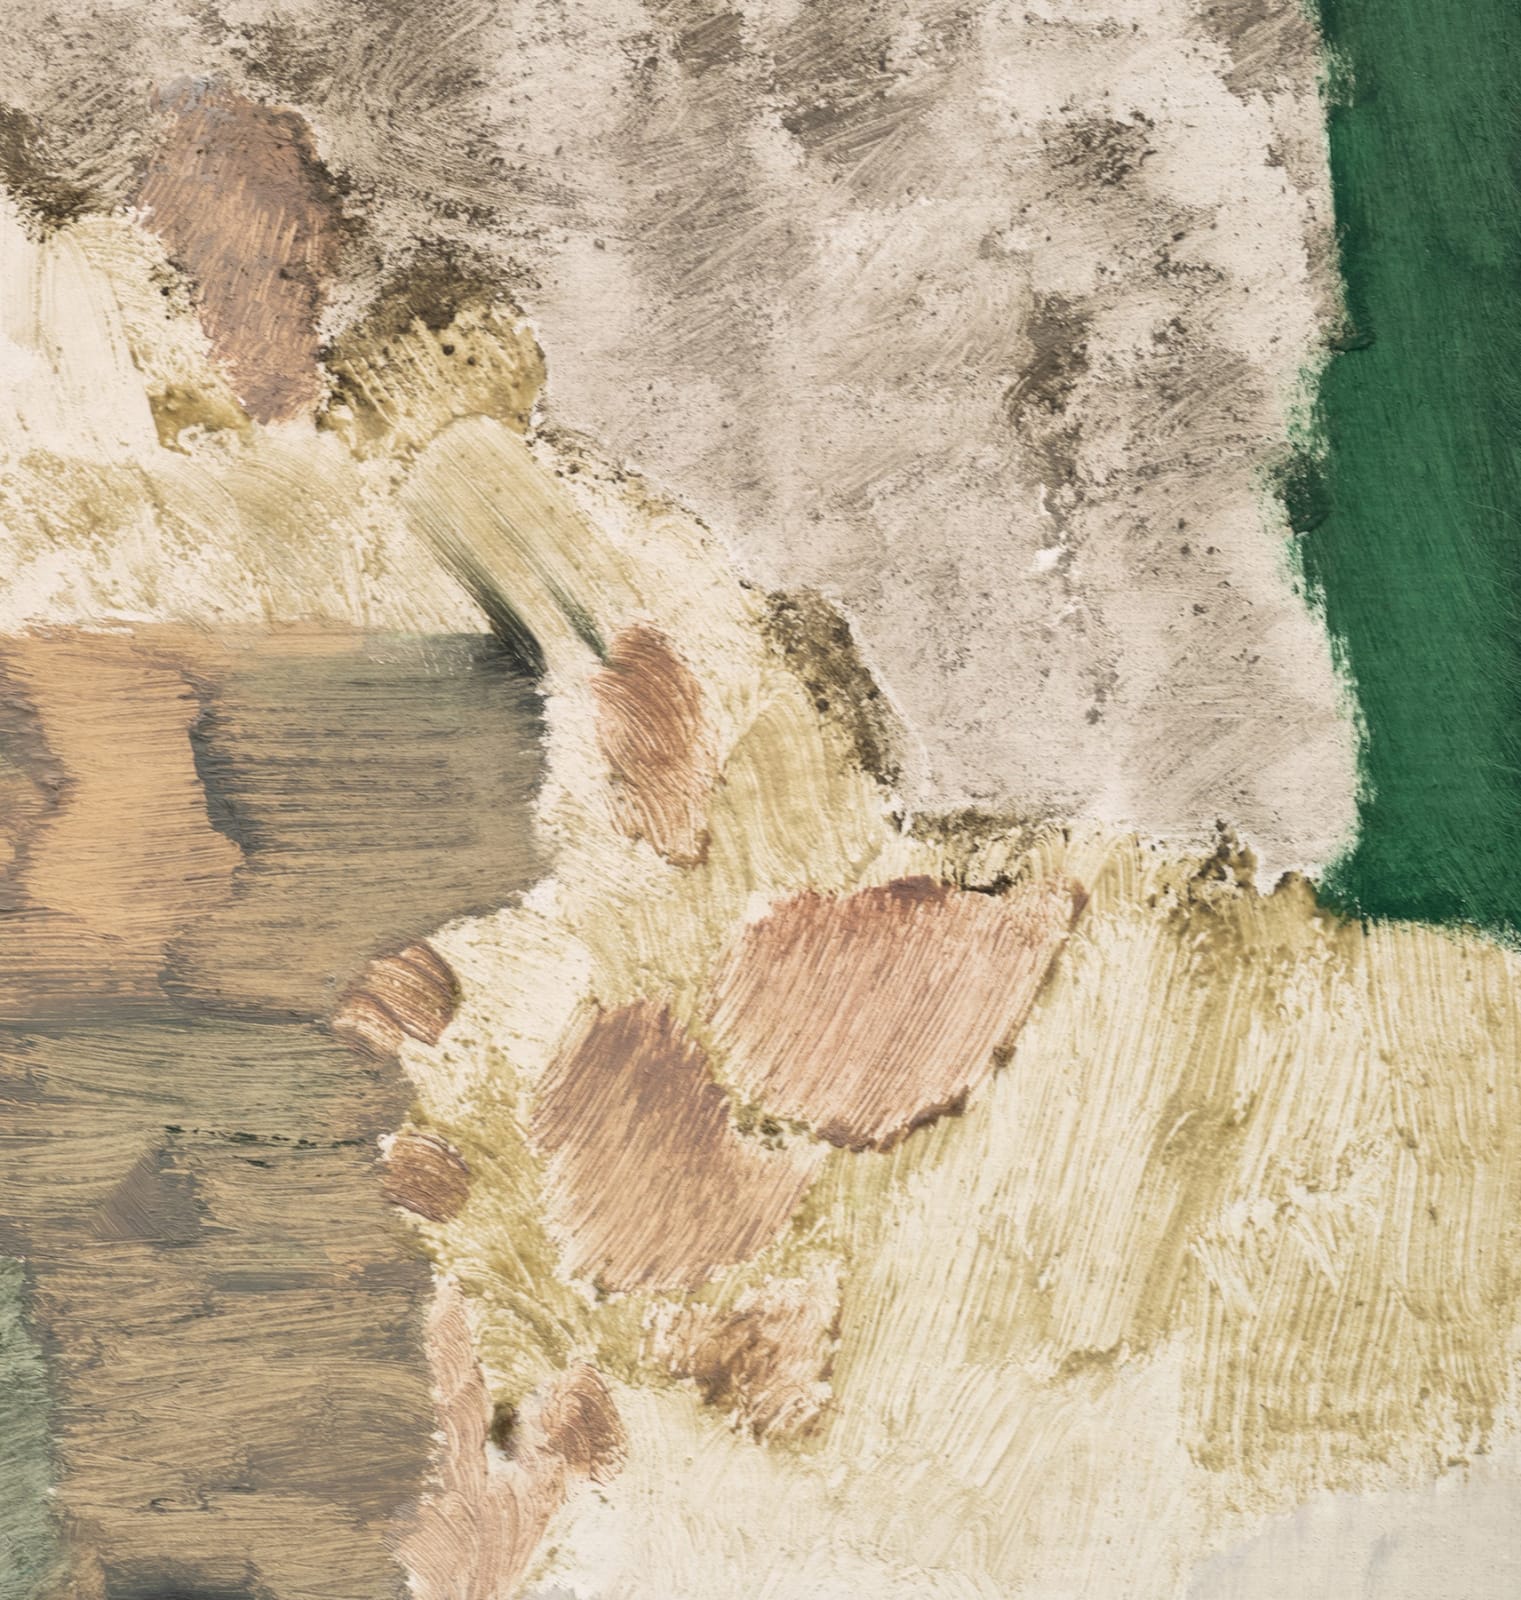 <p>Andreas Eriksson, <em>Bräckt</em>, 2019. Detail.</p><h3>"Territories of the finished tapestries might be distinguished by a particular knotted texture or the stands of long fibre sprouting from the surface. Andreas has described the tapestries as ‘existential landscapes’. We might also see them as a conceptual extension of painting in which the picture migrates to the canvas itself." </h3><p><strong>- Hettie Judah on Andreas Eriksson, 2020</strong></p>